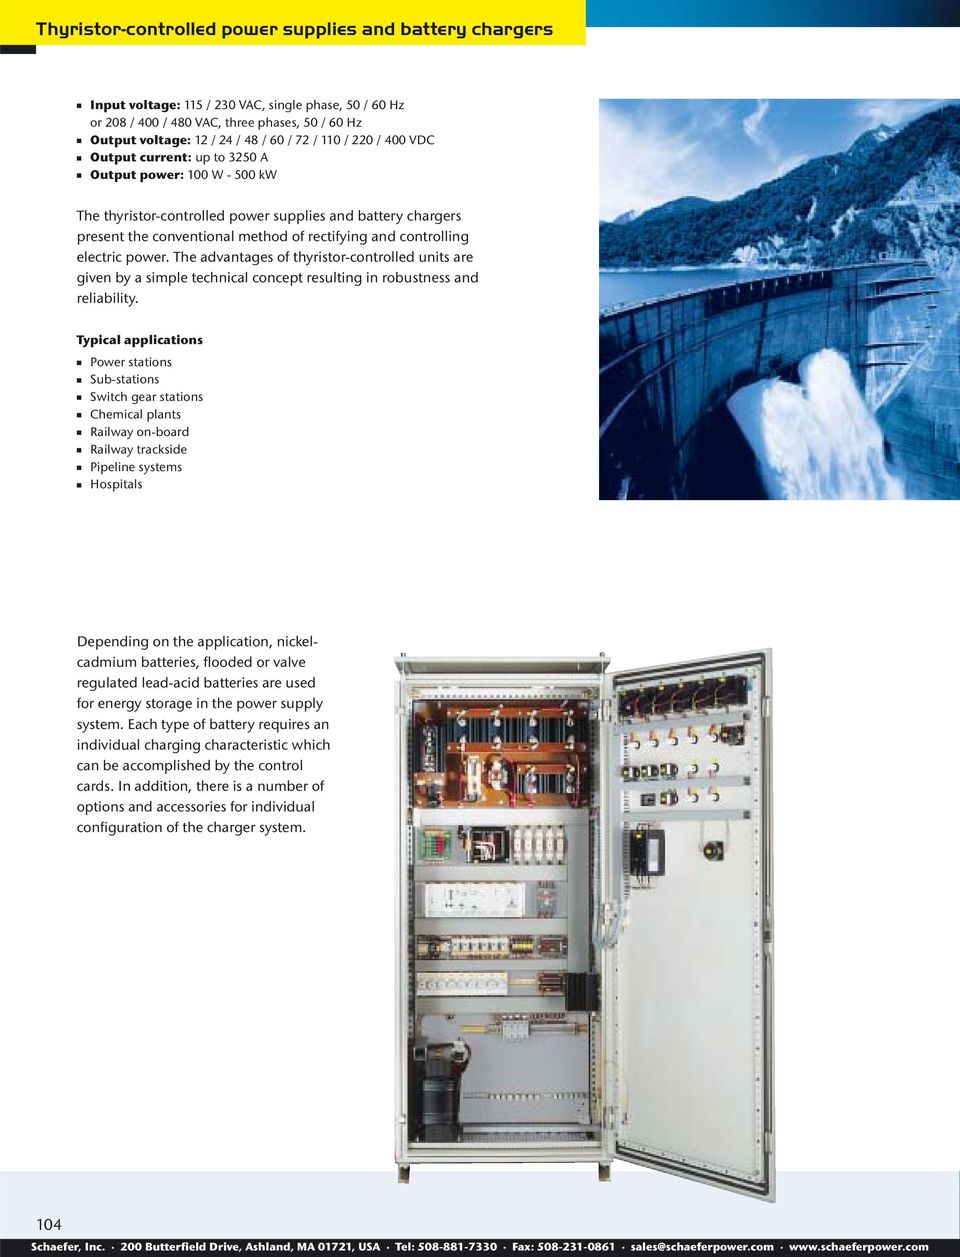 controlling electric power. The advantages of thyristor-controlled units are given by a simple technical concept resulting in robustness and reliability.